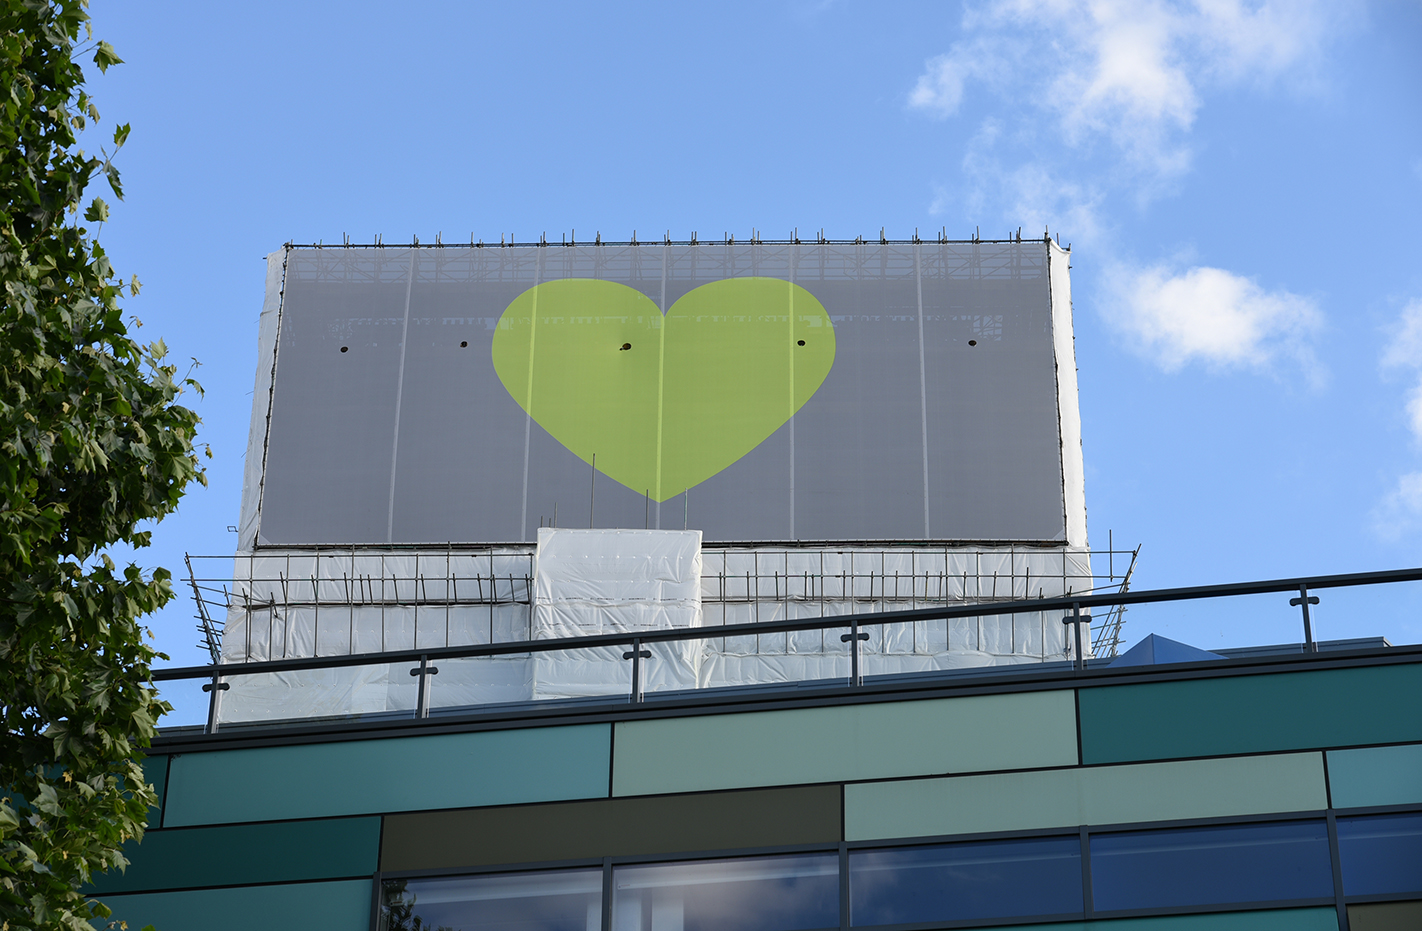 Fifth Anniversary of Grenfell Tower Fire